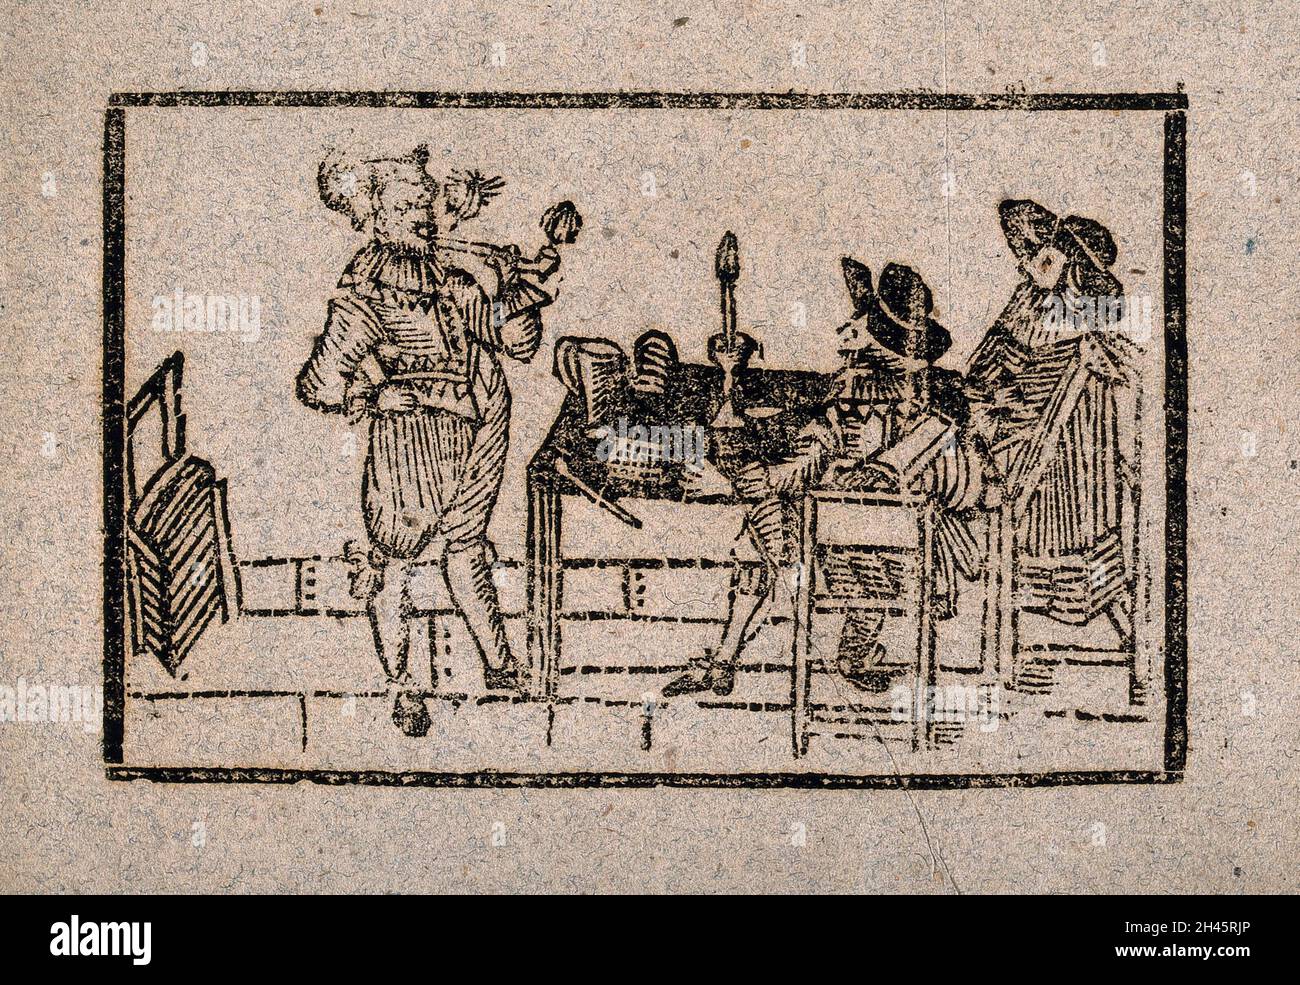 A man stands smoking a pipe as two onlookers sit at a table. Woodcut, 17th century. Stock Photo